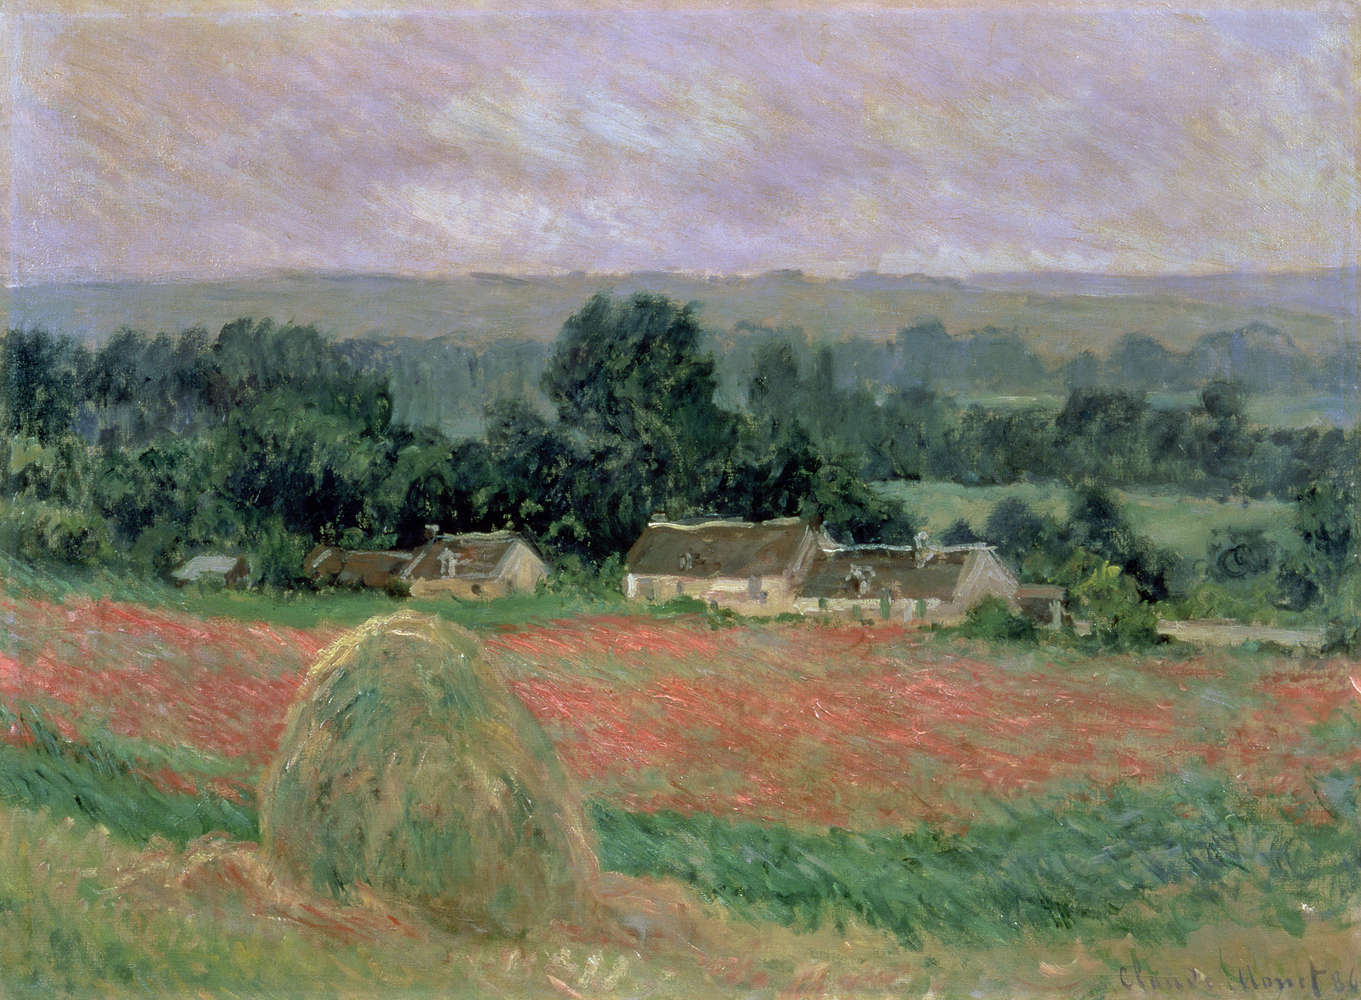             Photo wallpaper "Haystack in Giverny" by Claude Monet
        